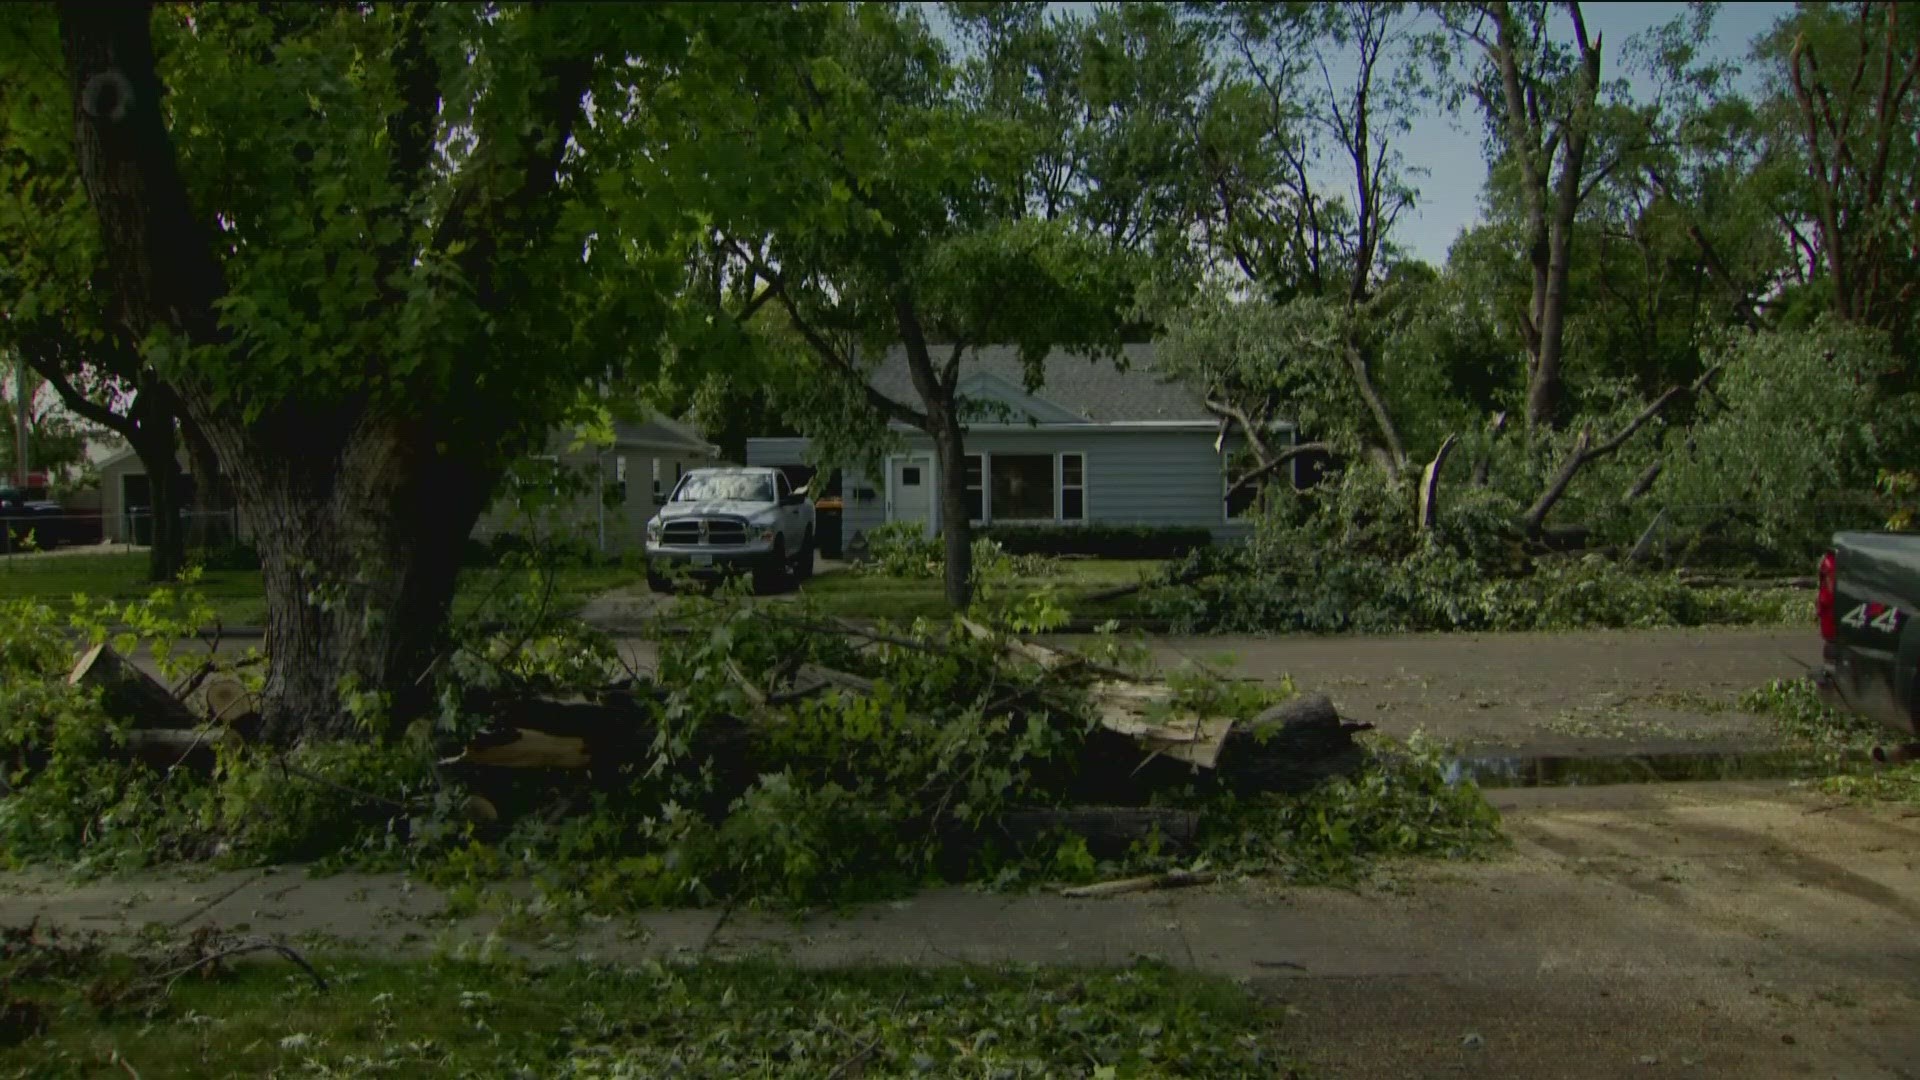 Insurance agents say Minnesota has seen more hail storms in recent years and insurance companies are making adjustments to recoup costs.